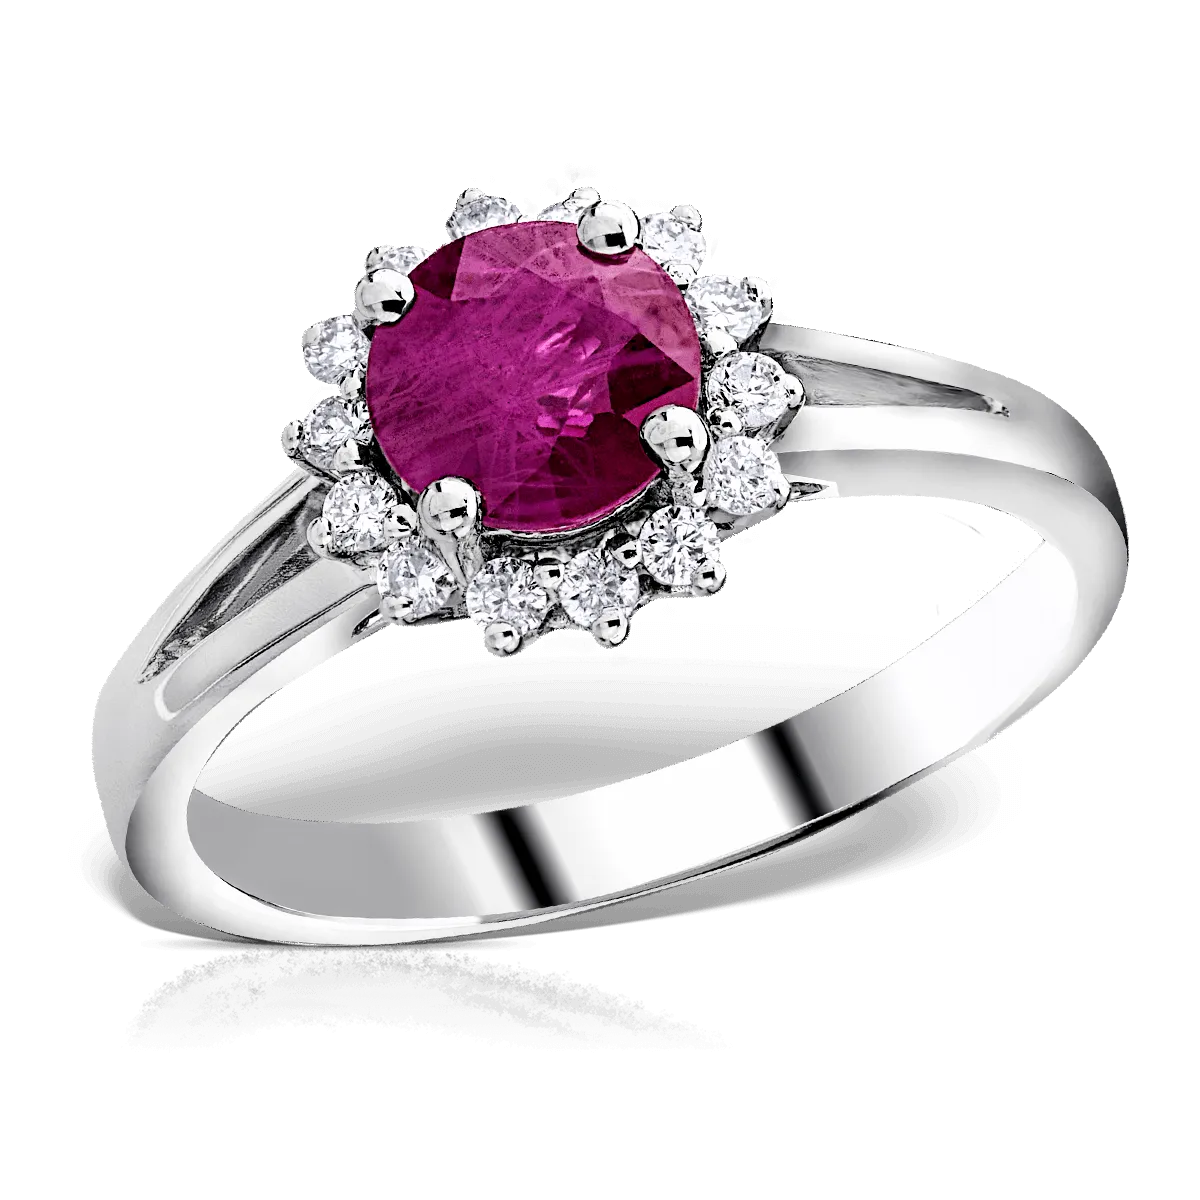 18K white gold ring with 1.1ct ruby and 0.17ct diamonds